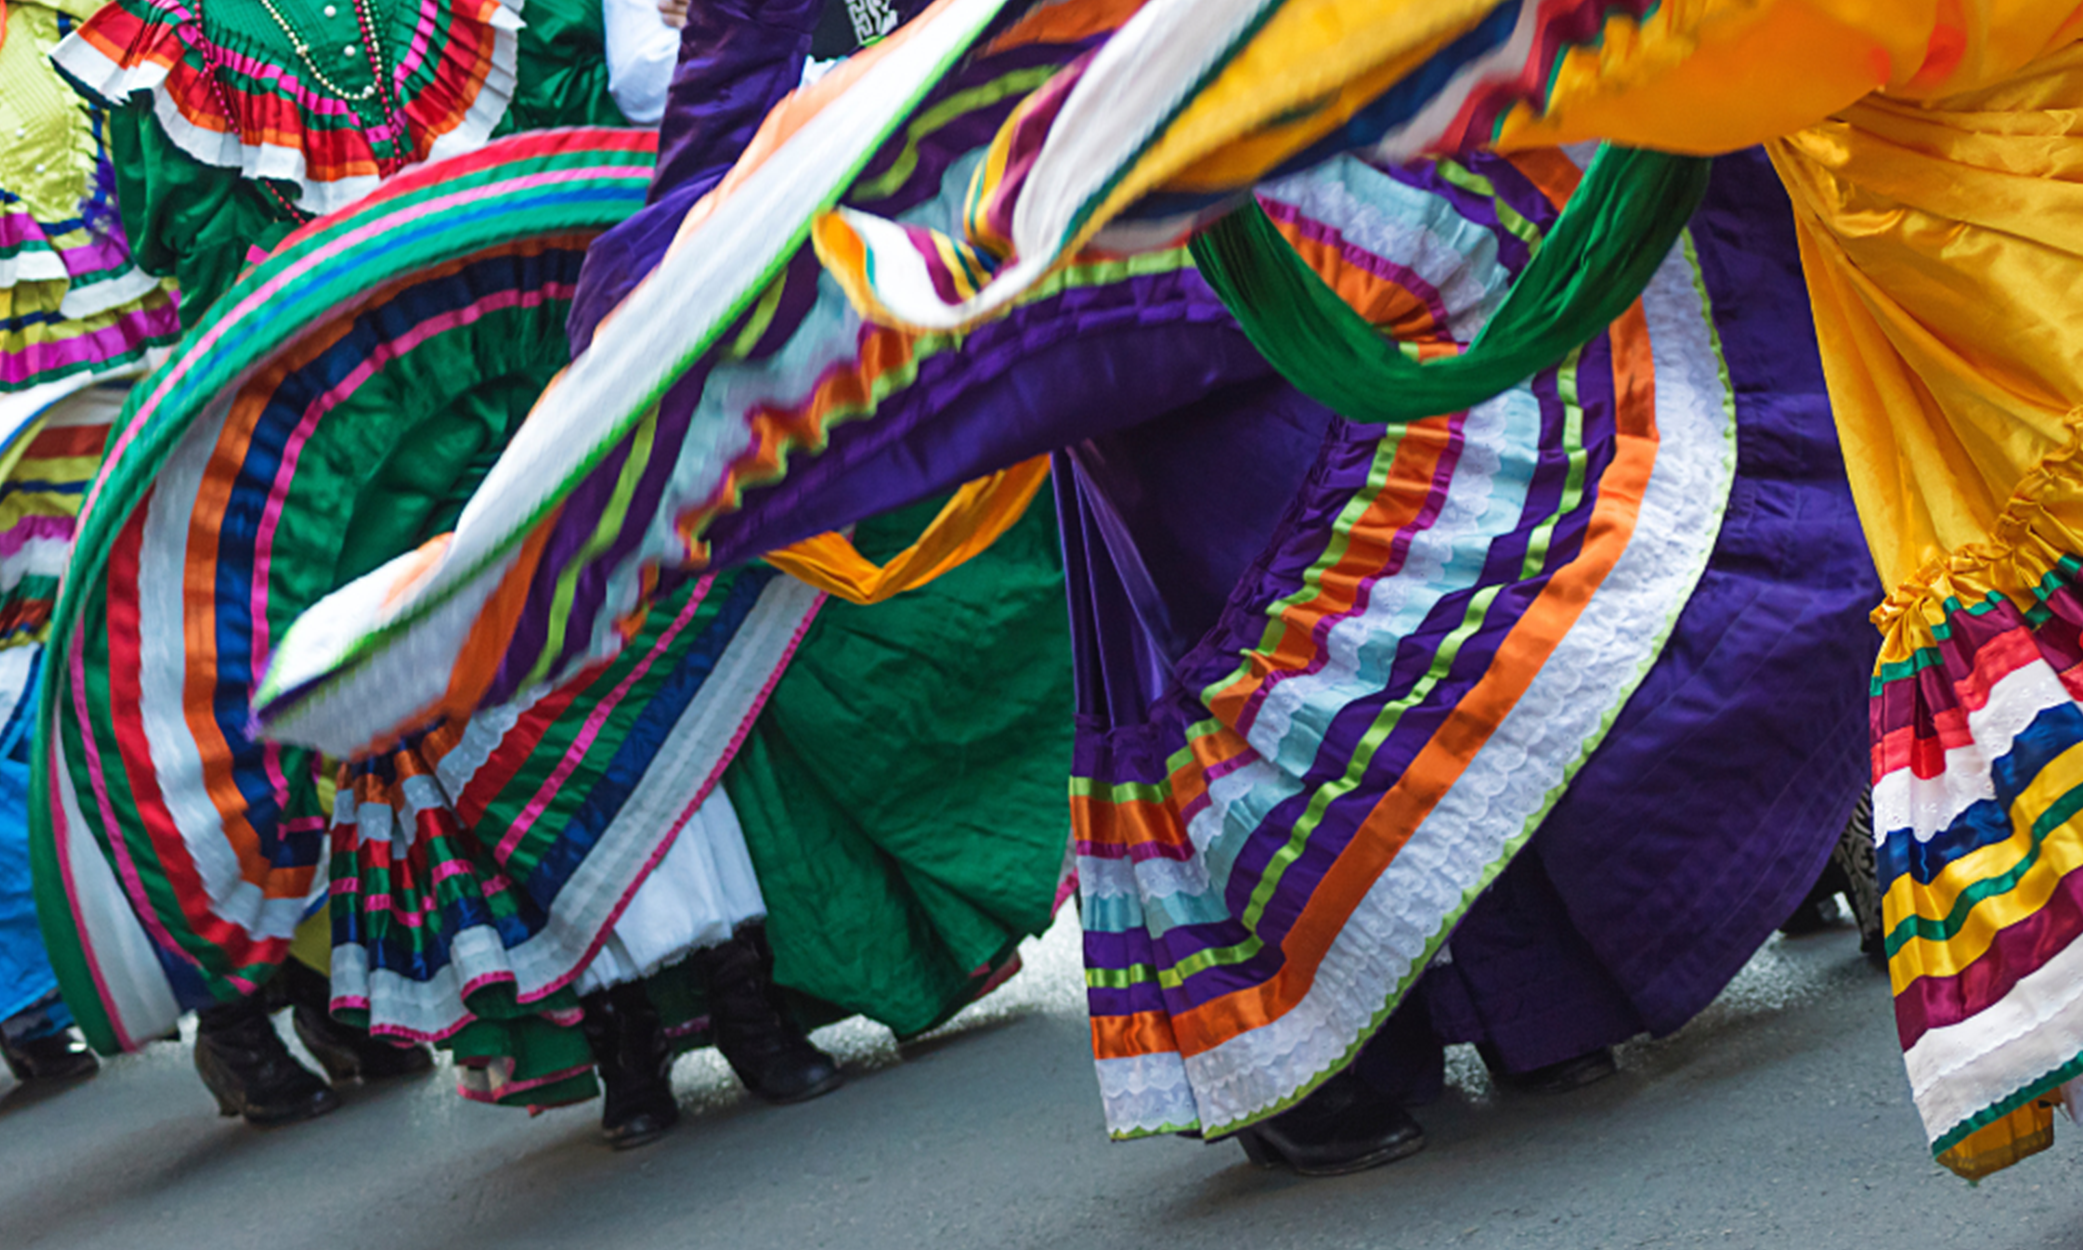 Close up of colorful folklorico dancer's dresses/skirts in motion.